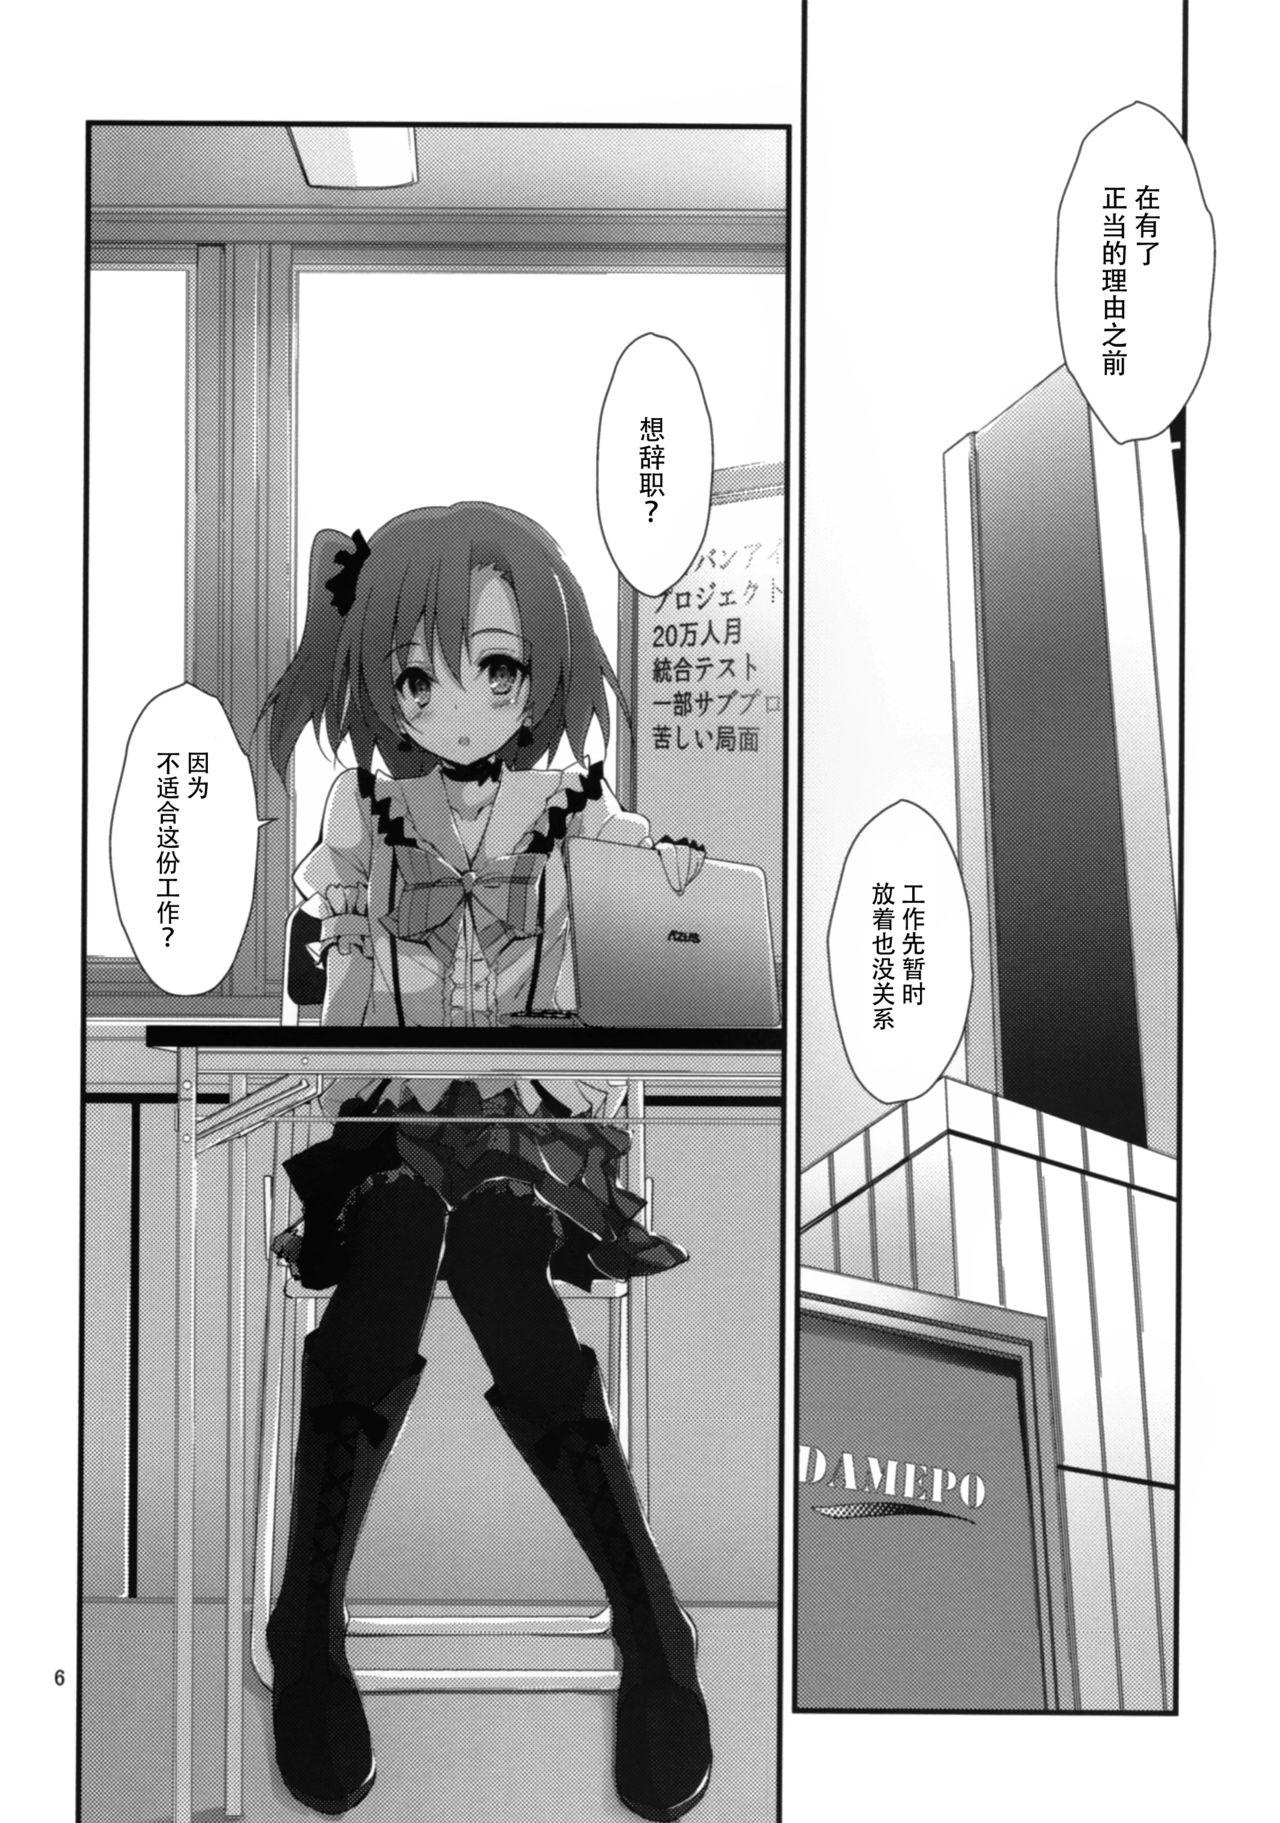 Bus Compliance 2 - Love live Teen Fuck - Page 6